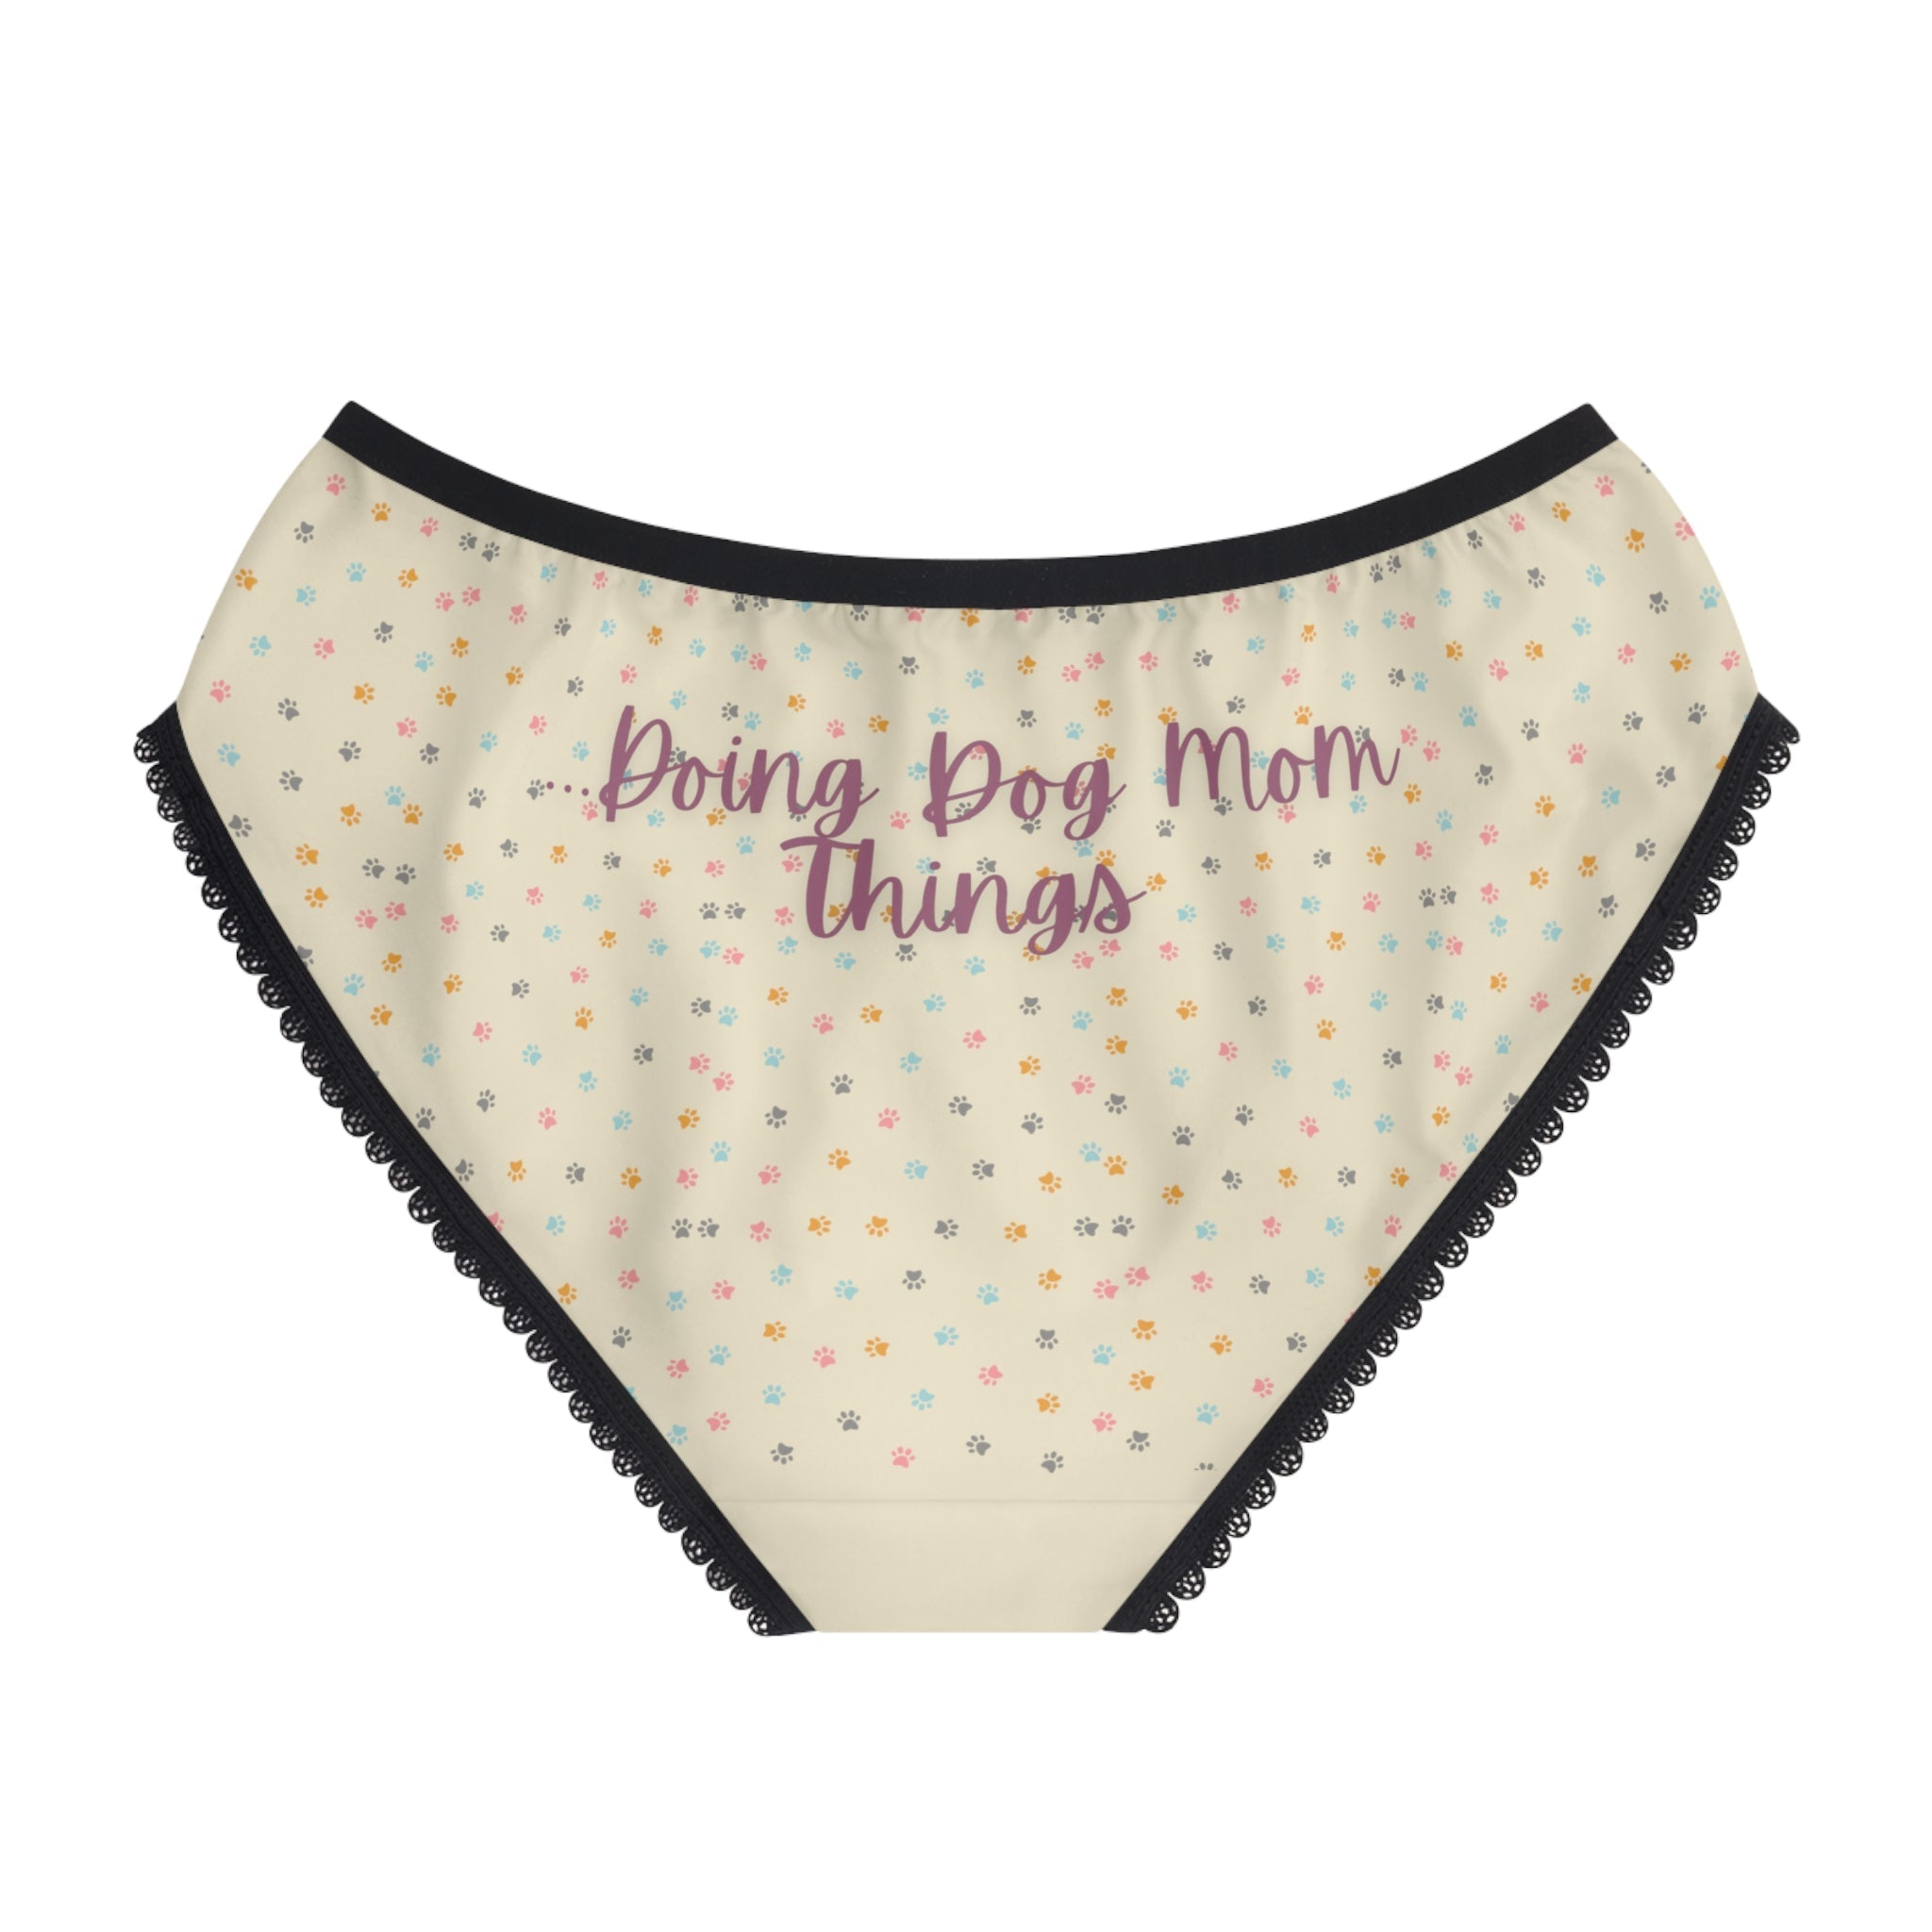 Doing Dog Mom Things Undies - XS / Black stitching All Over